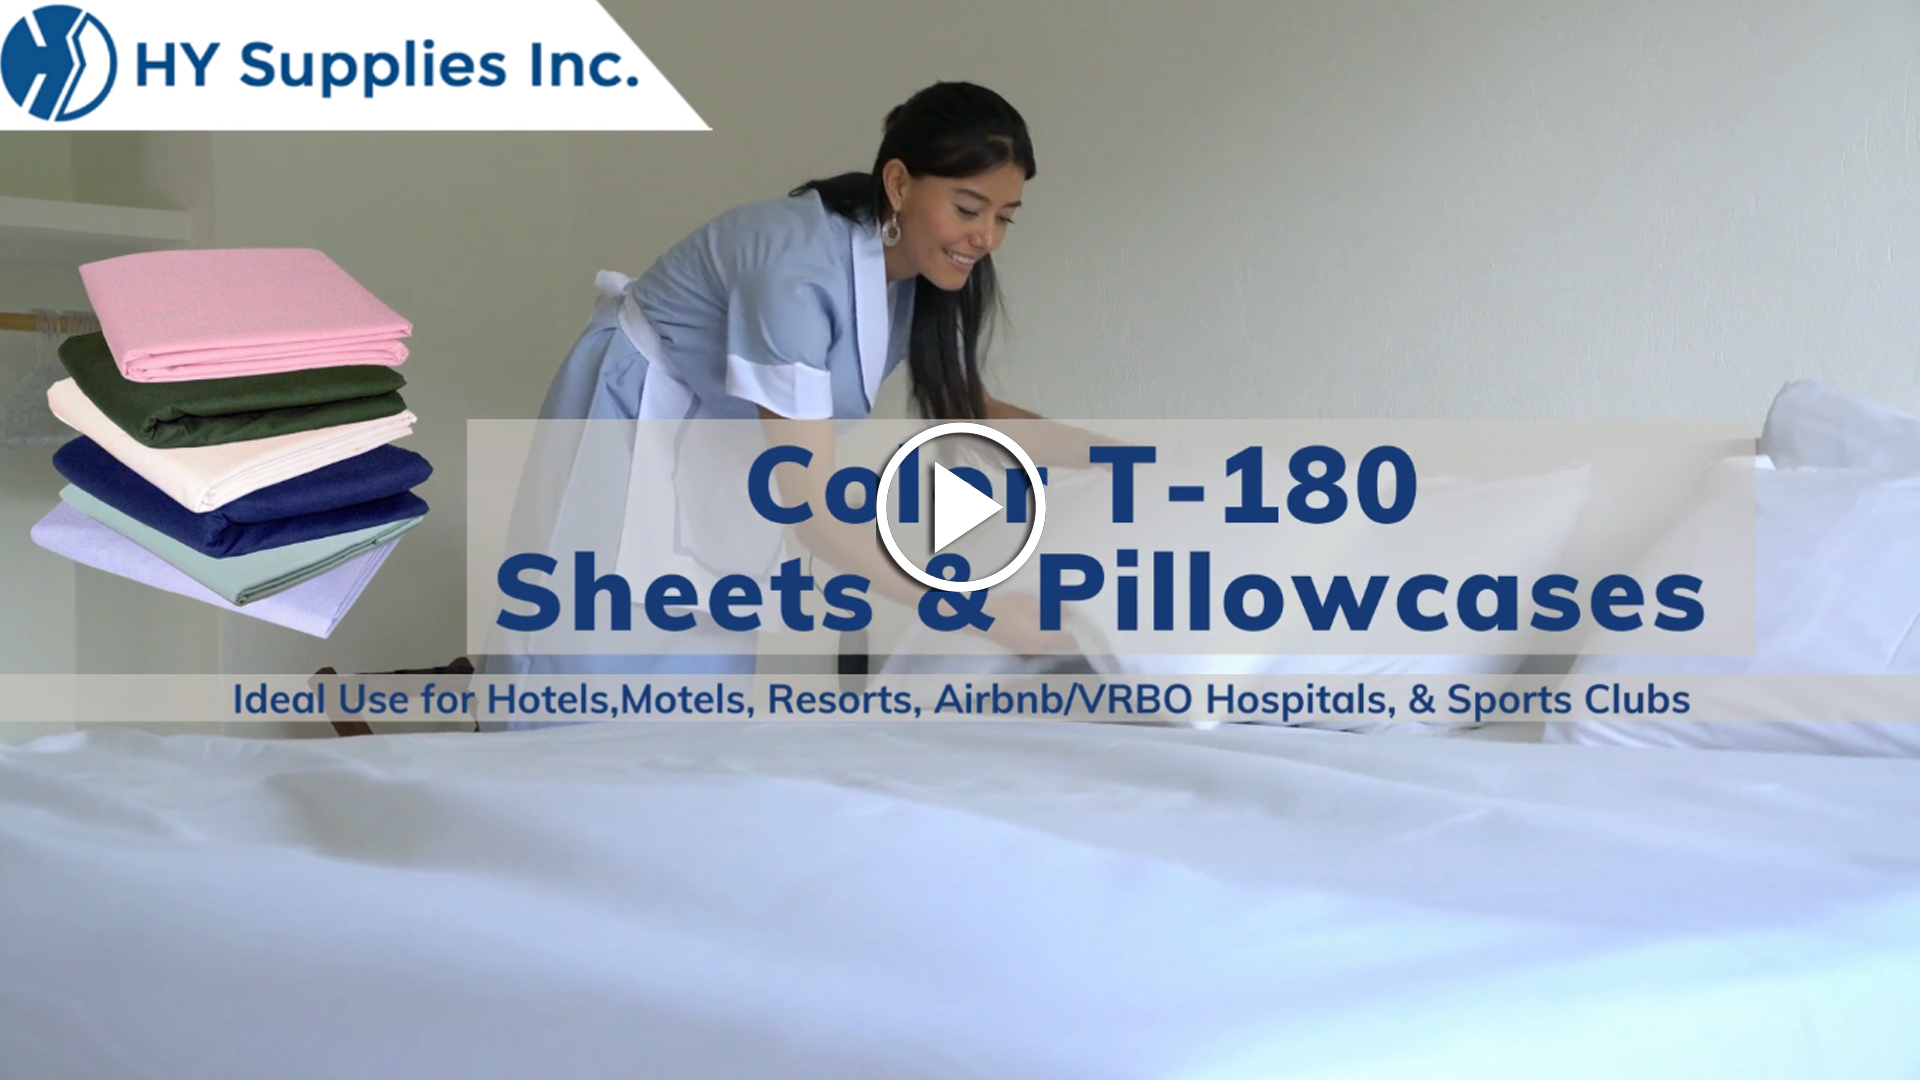 Color T-180 Sheets & Pillowcases